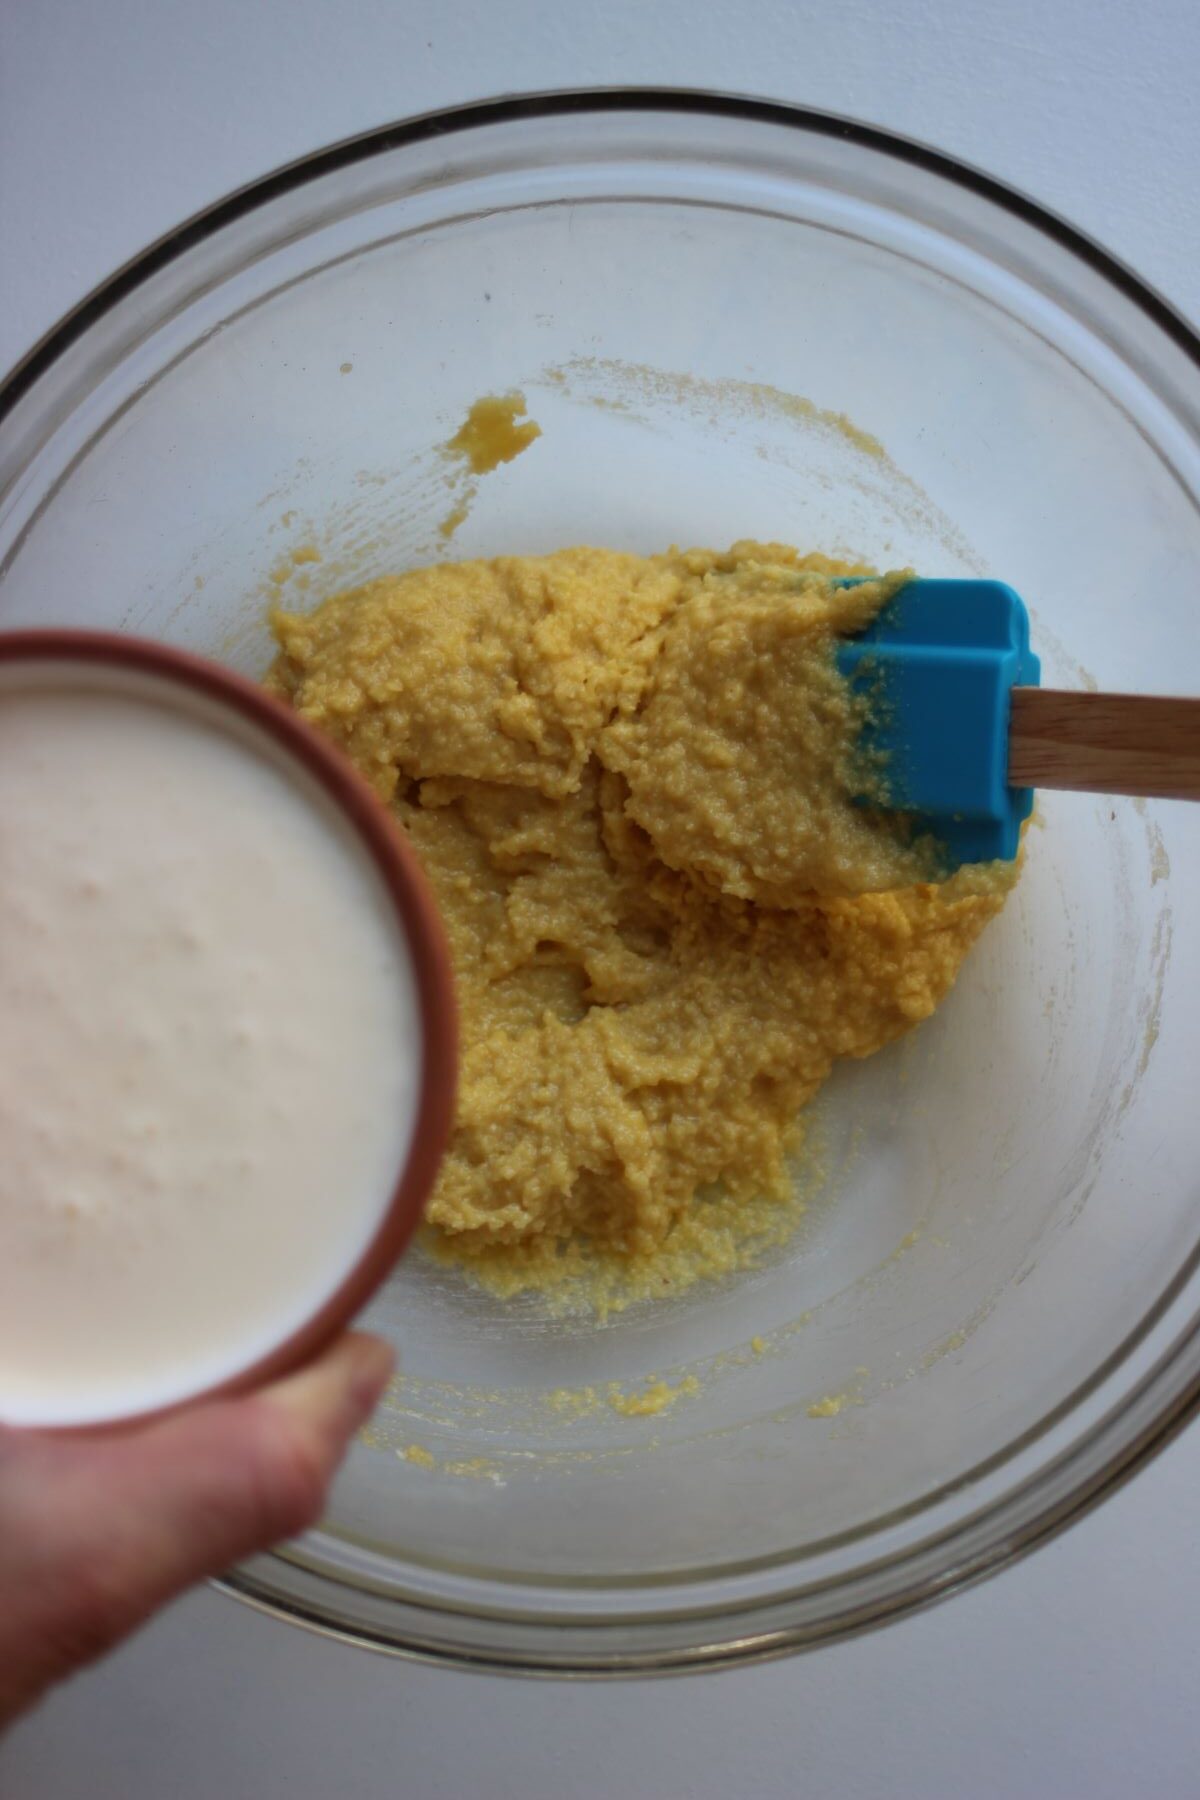 Bowl with cream is about to be poured into glass bowl with yellow mixture.